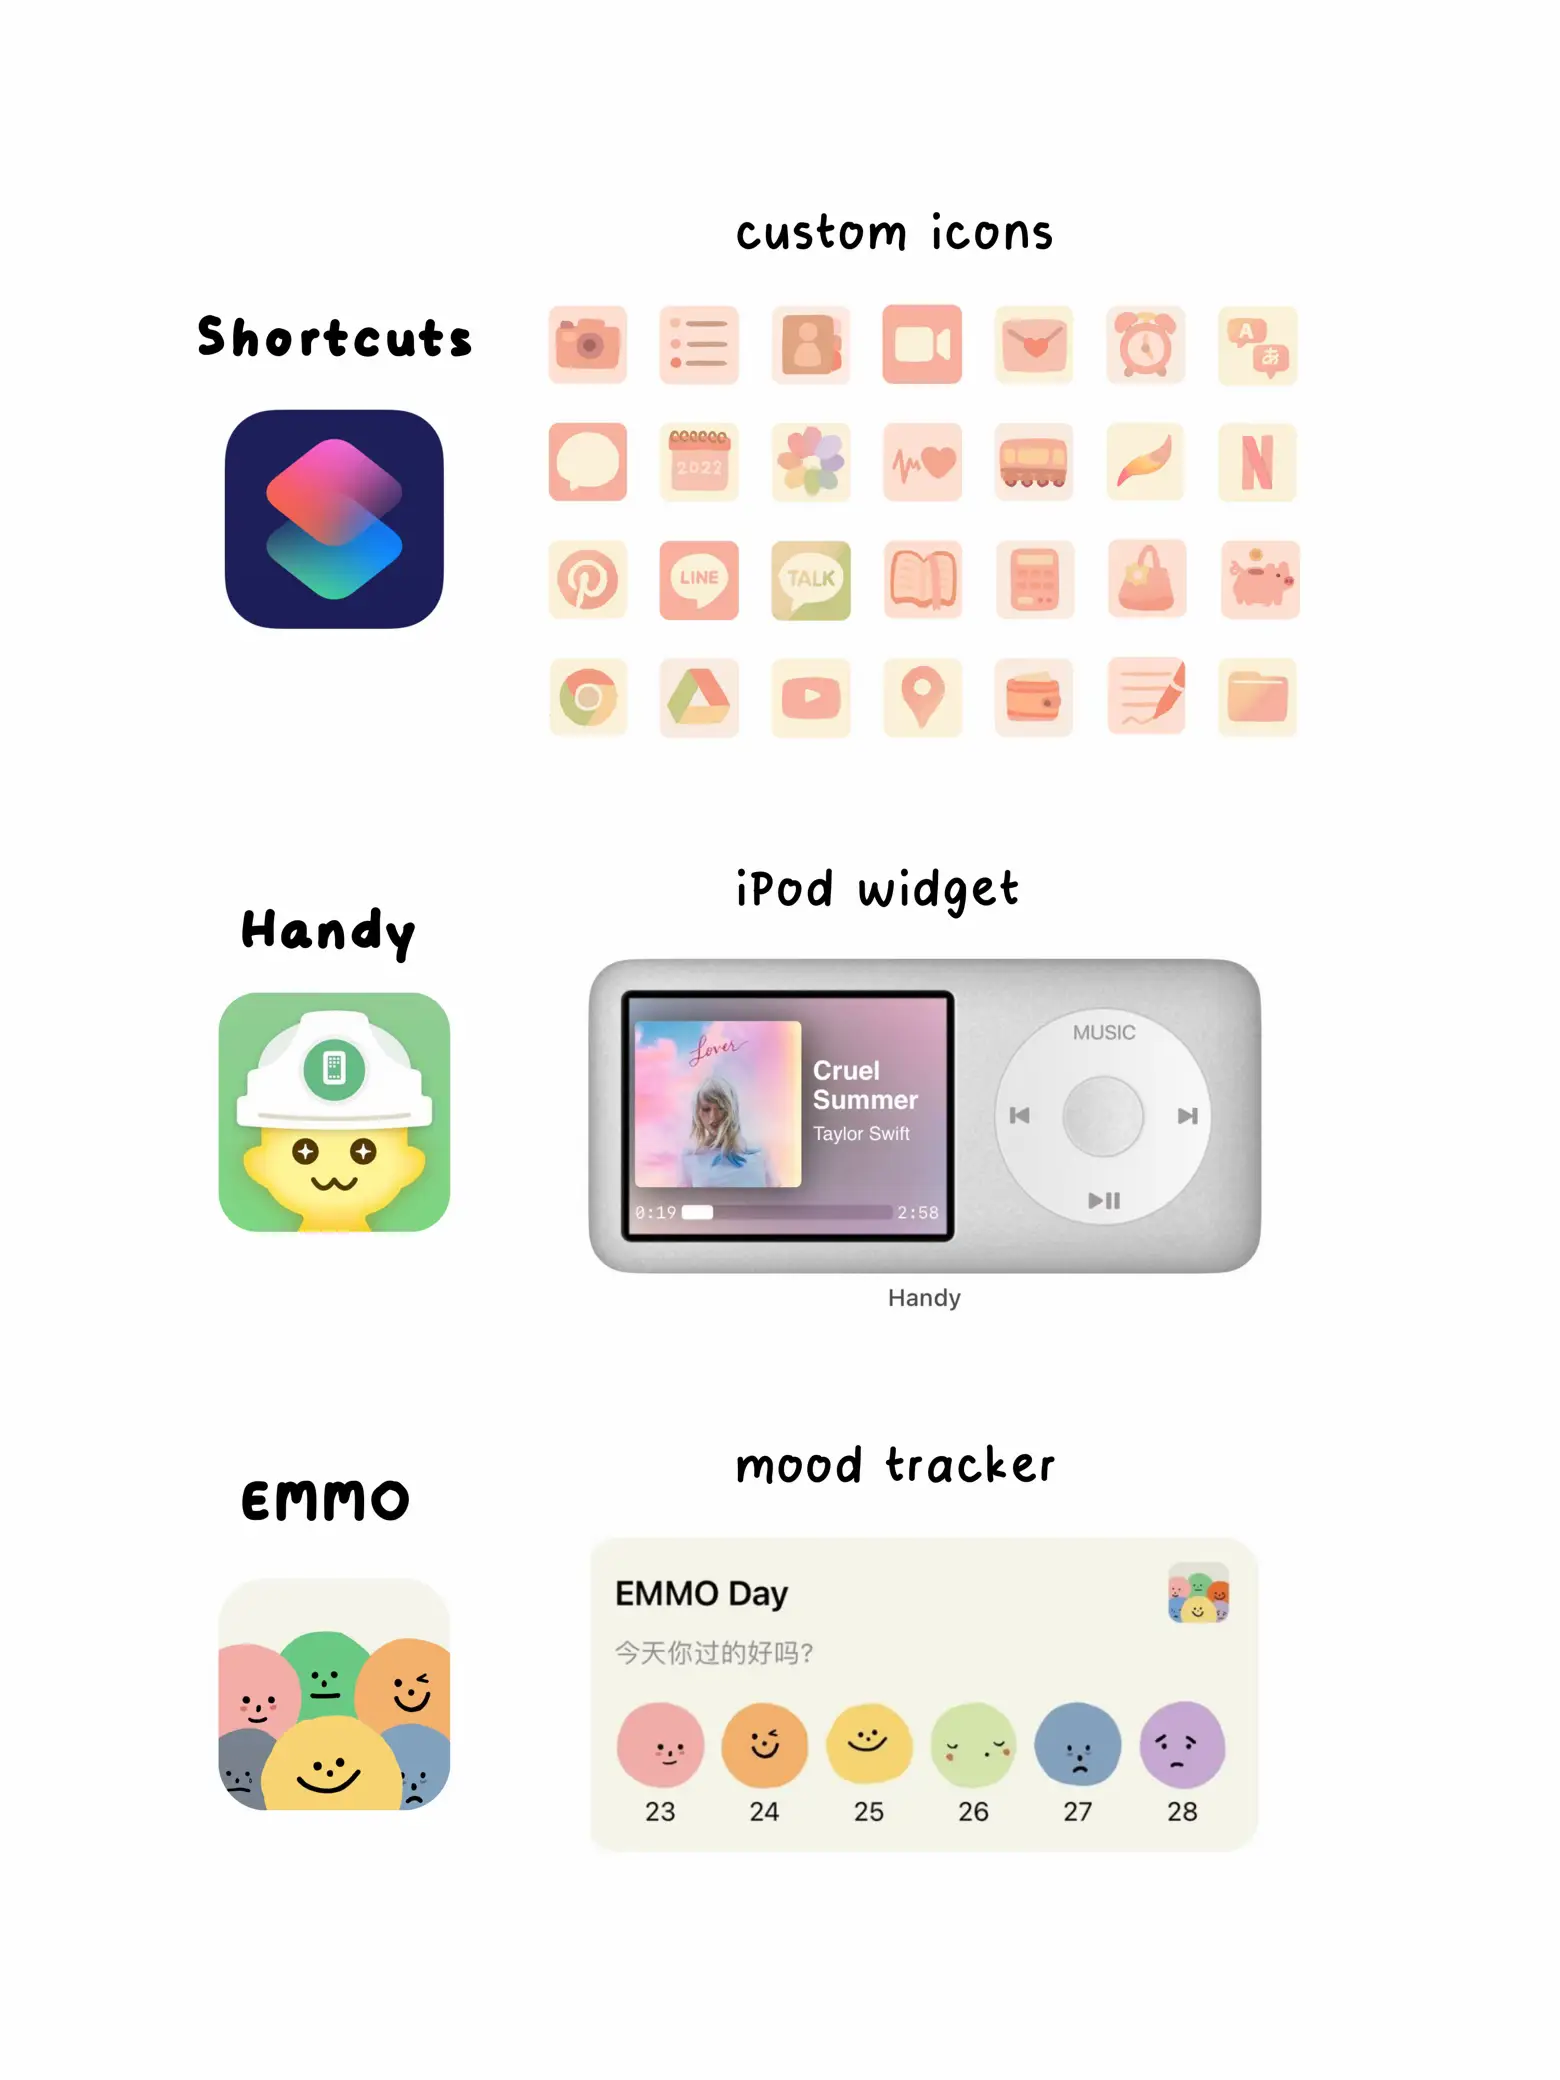  A list of icons and widgets for various applications.